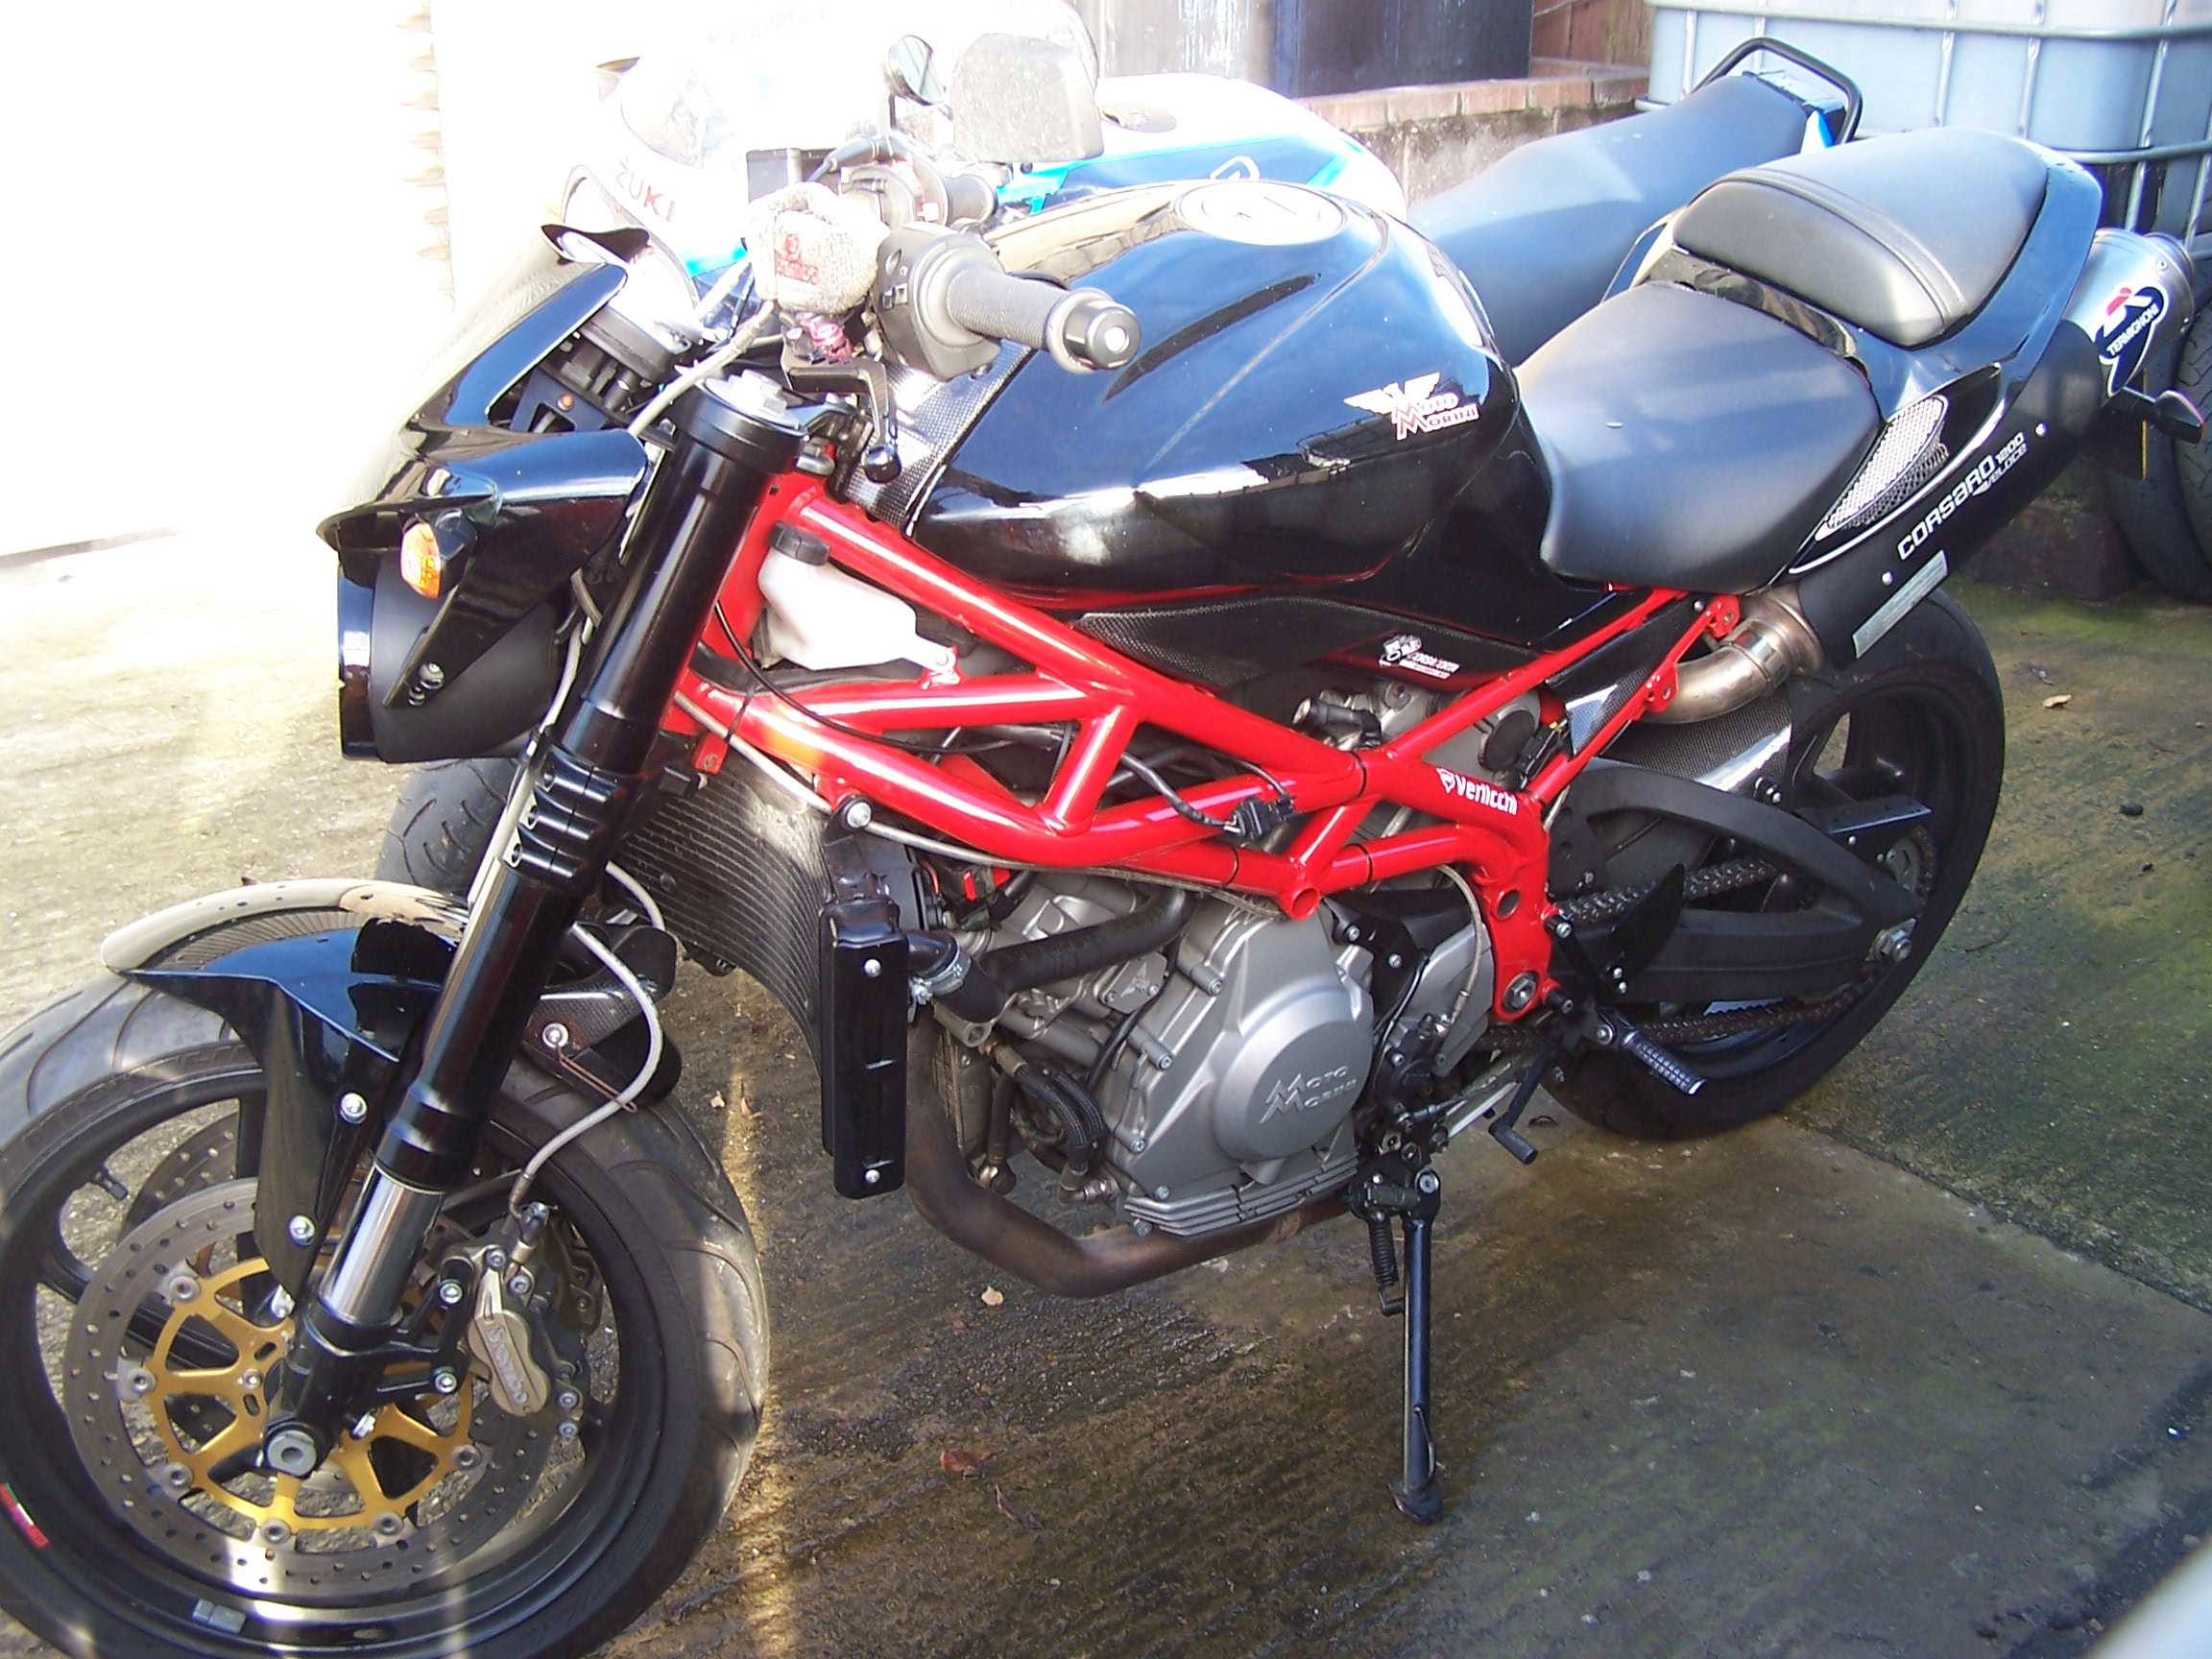 Moto Morini 1200 Corsaro (yes, another one) ECU remap… **updated with owner’s thoughts**